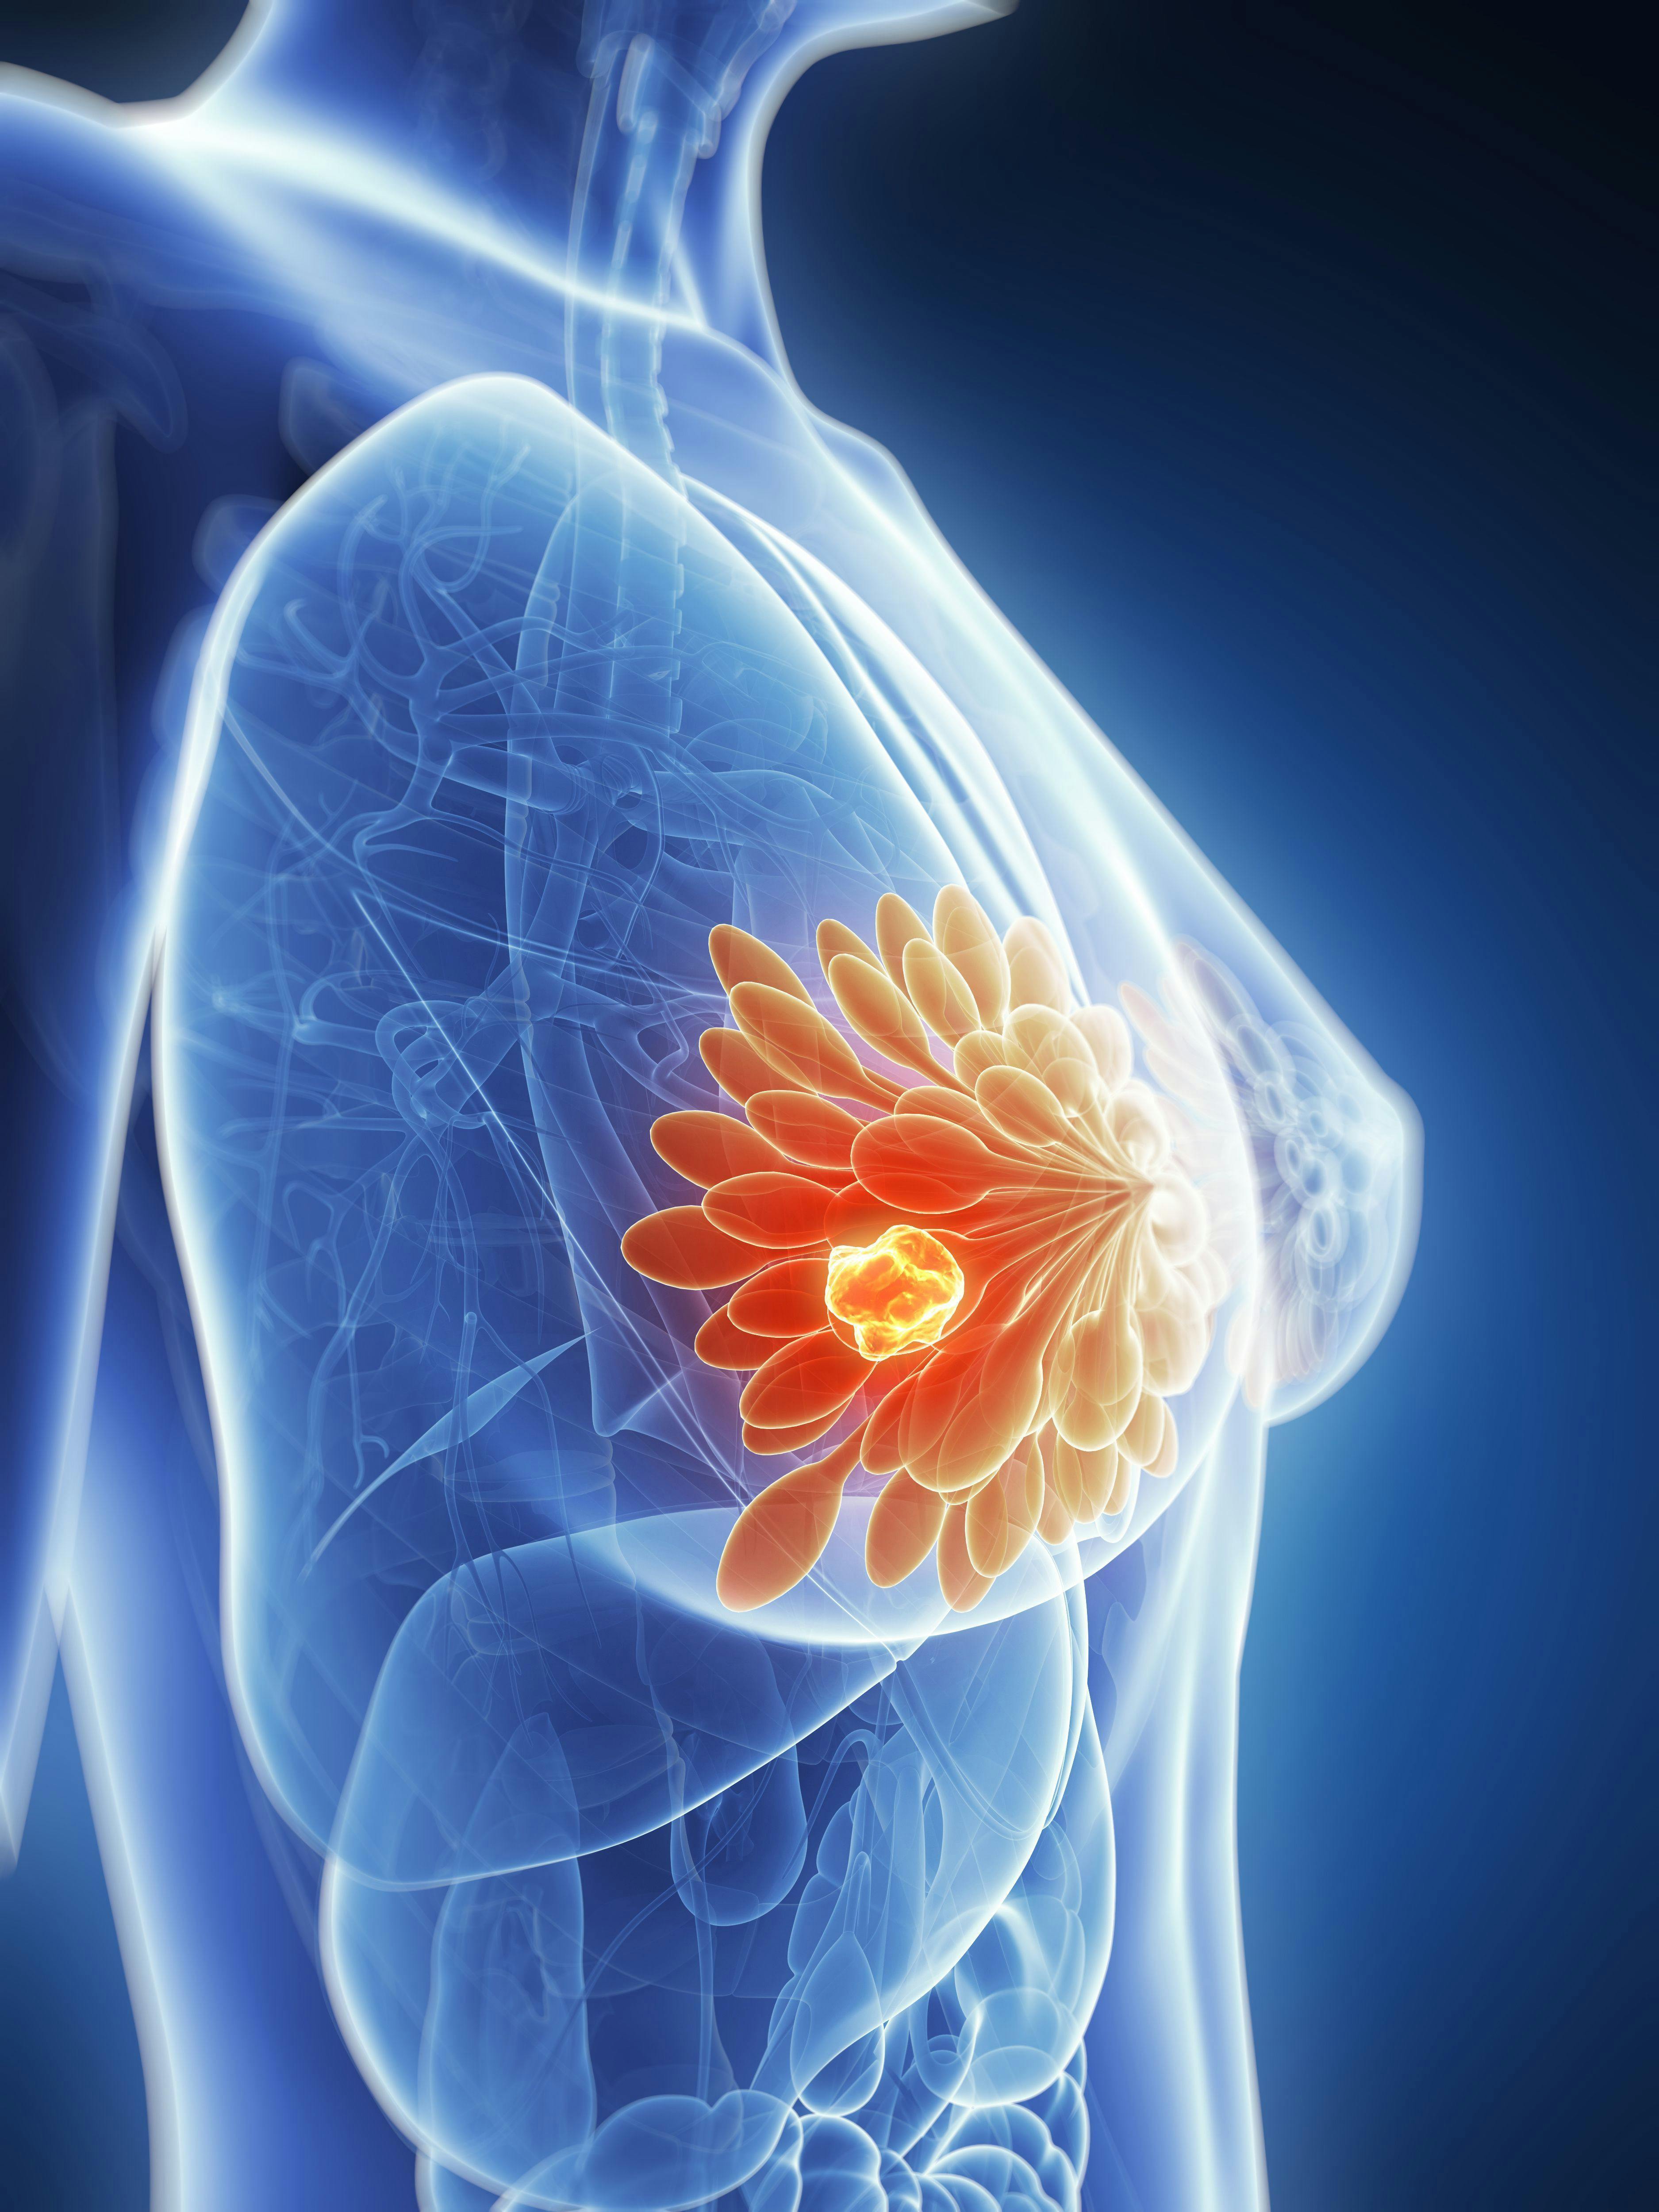 Phase 3 TROPiCS-02 Trial Meets Primary End Point of PFS in HR+/HER2- Metastatic Breast Cancer